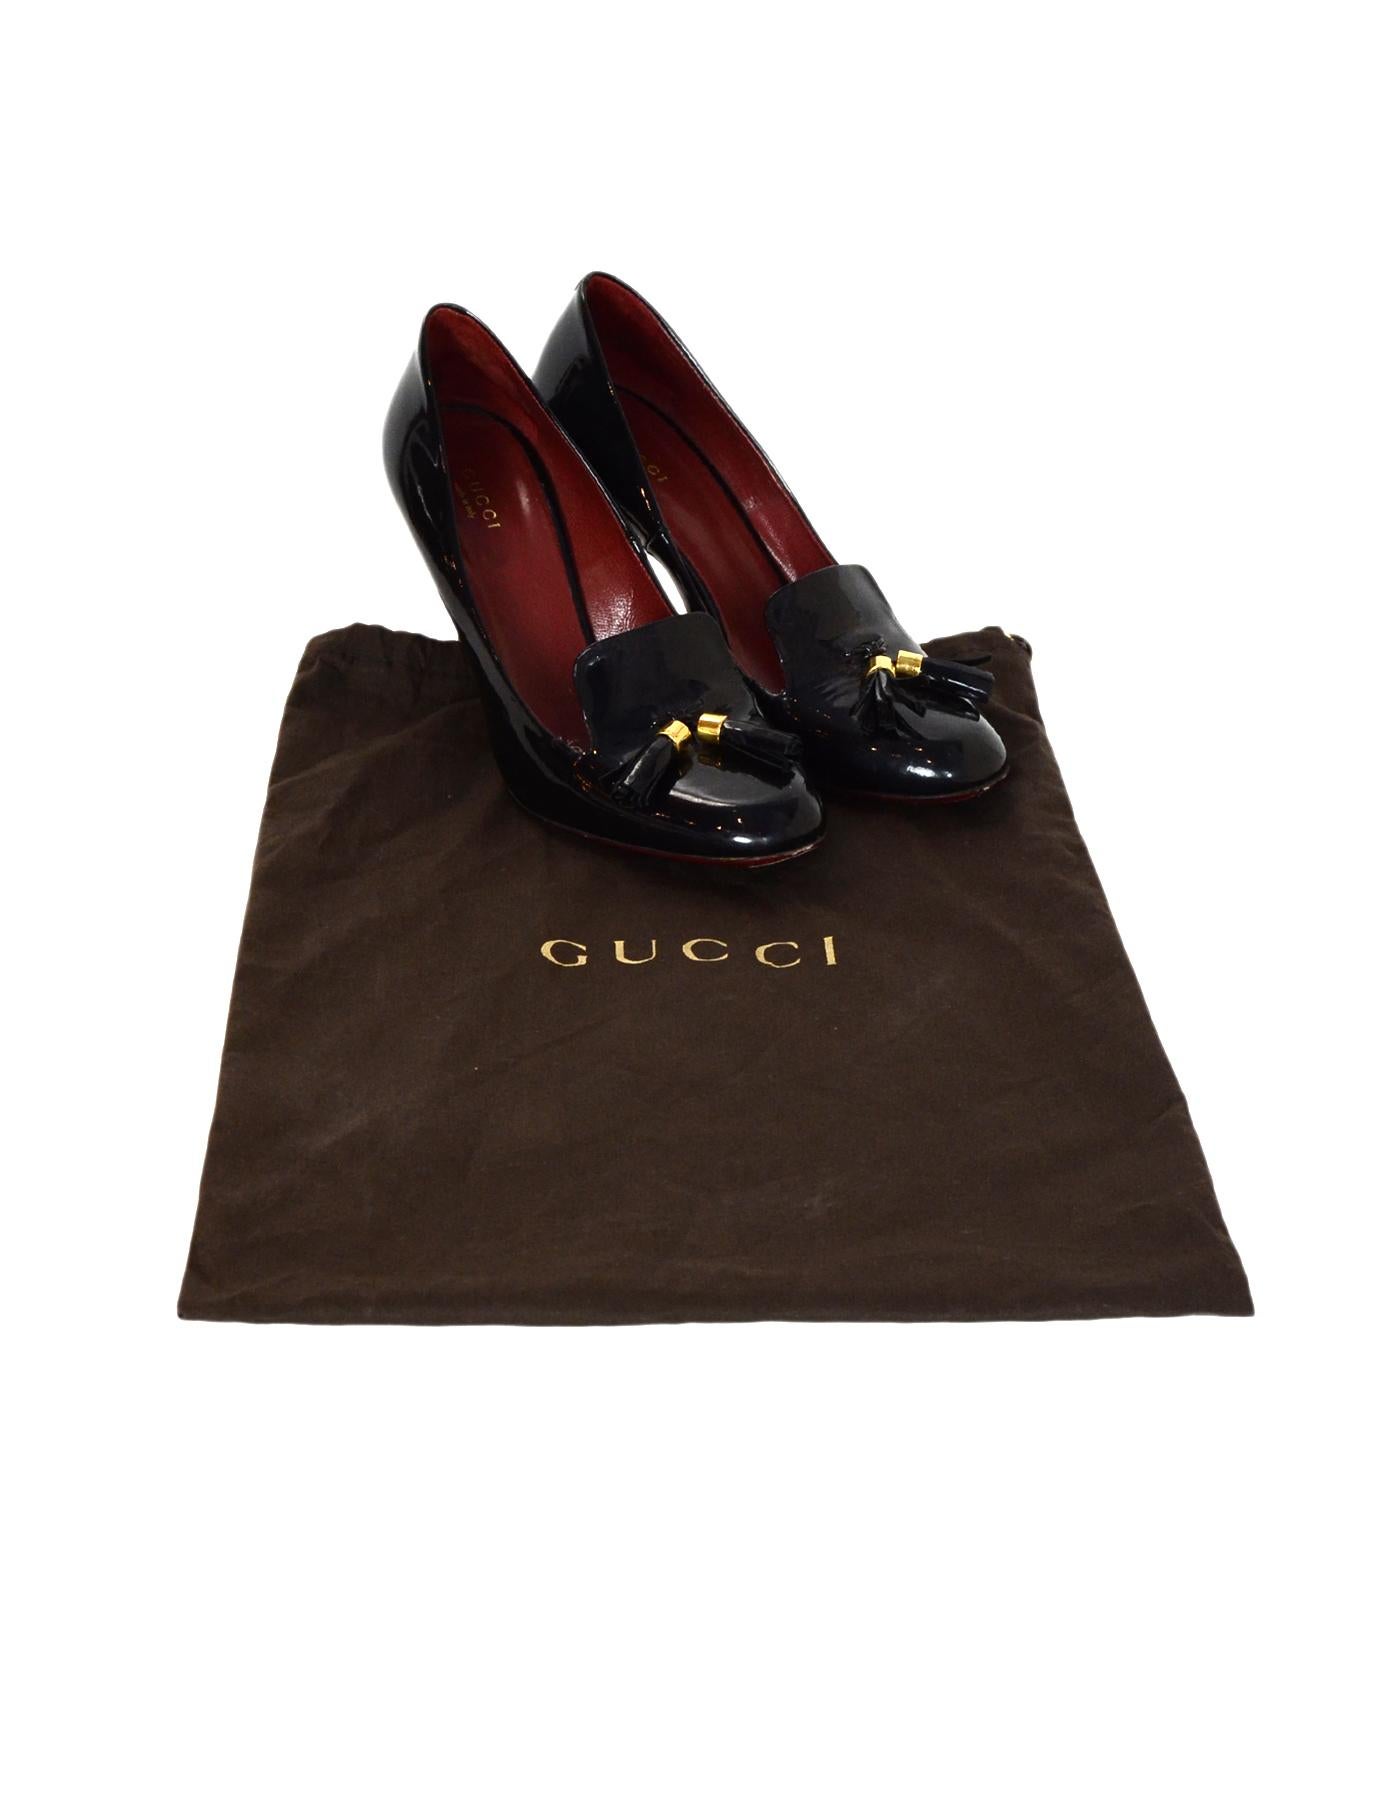 Gucci Black Patent Leather Pumps Heels W/ Tassel Sz 40

Made In: Italy
Color: Black, gold
Hardware: Goldtone
Materials: Patent leather, metal
Closure/Opening:  Slide on
Overall Condition: Excellent pre-owned condition with exception of some